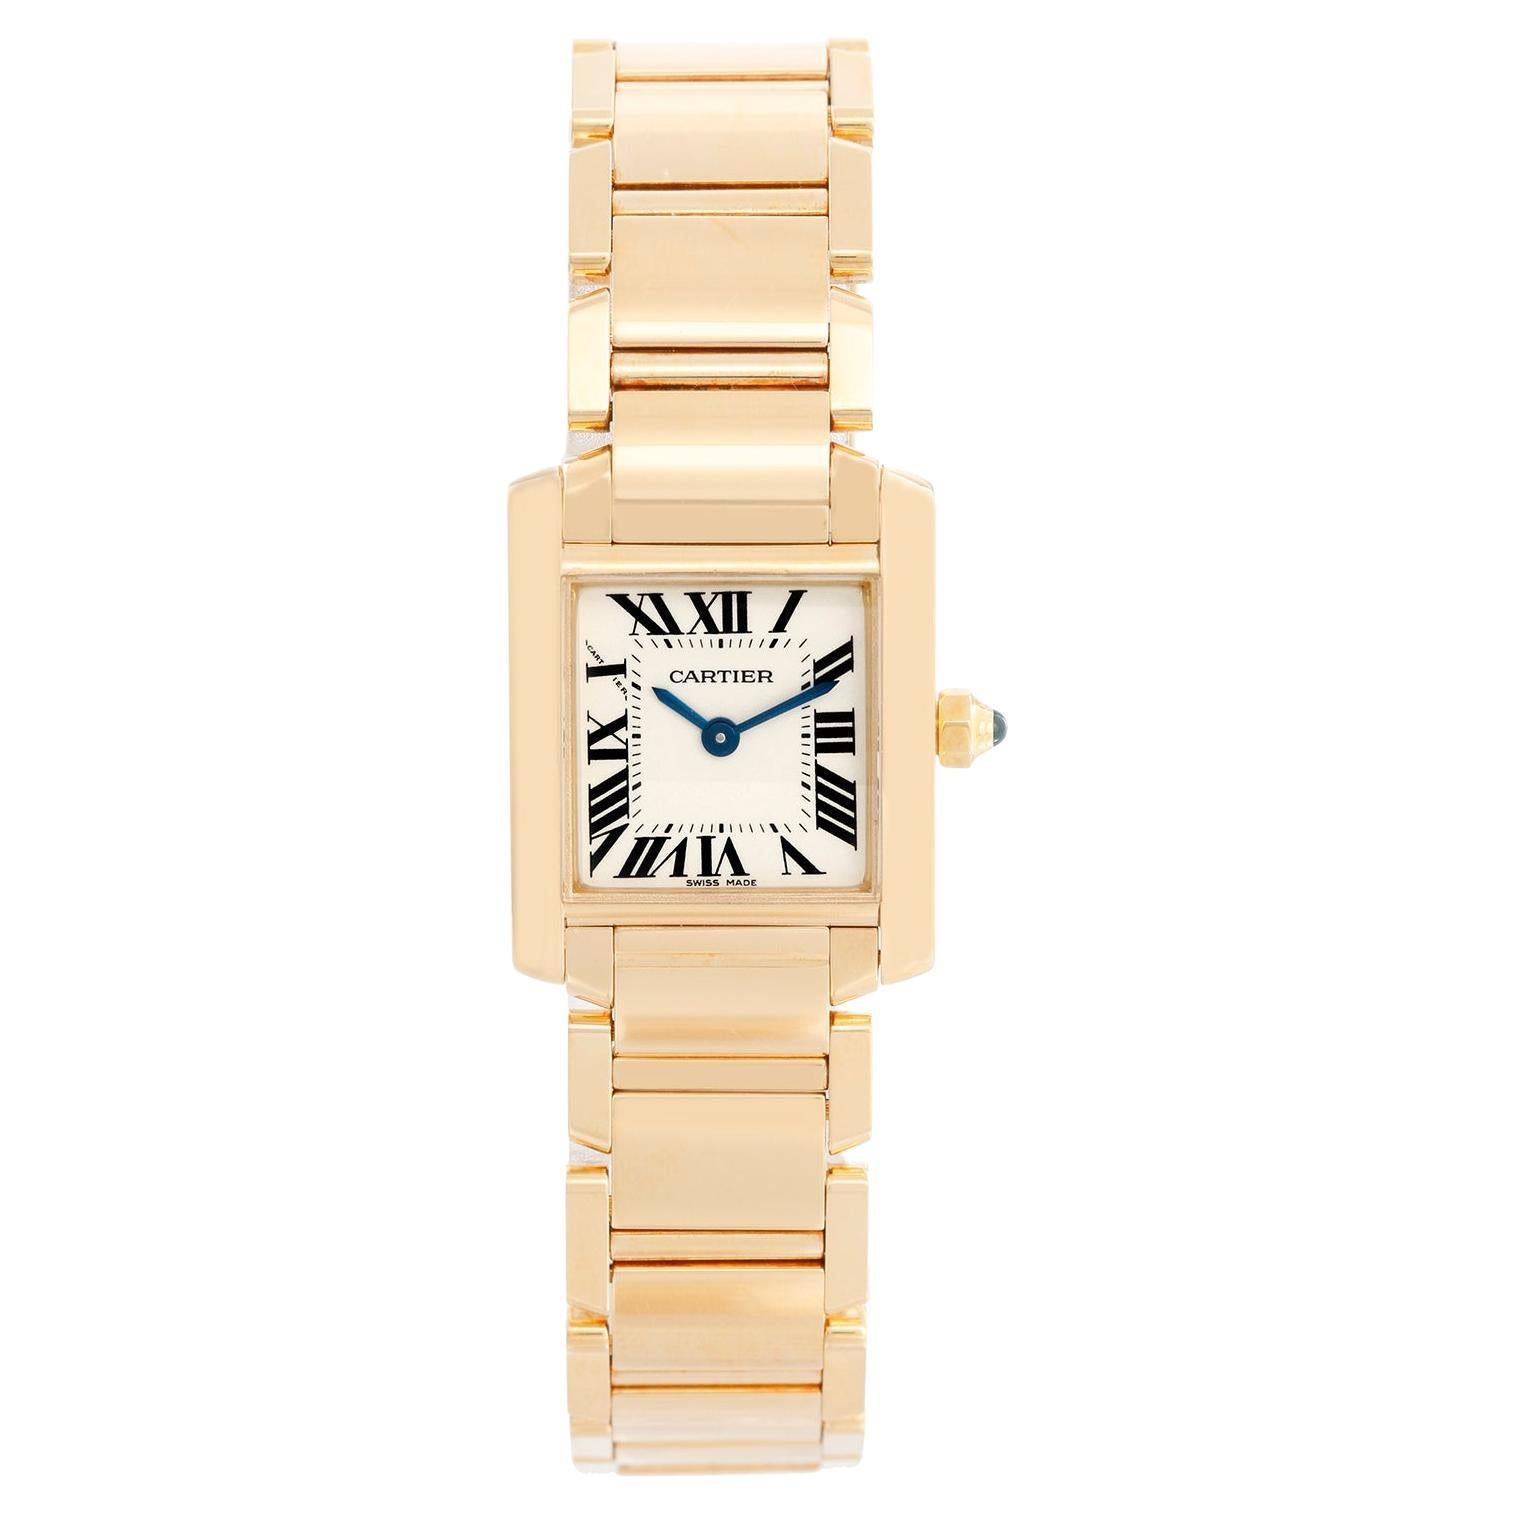 Cartier Tank Francaise 18k Yellow Gold Ladies Watch 2385